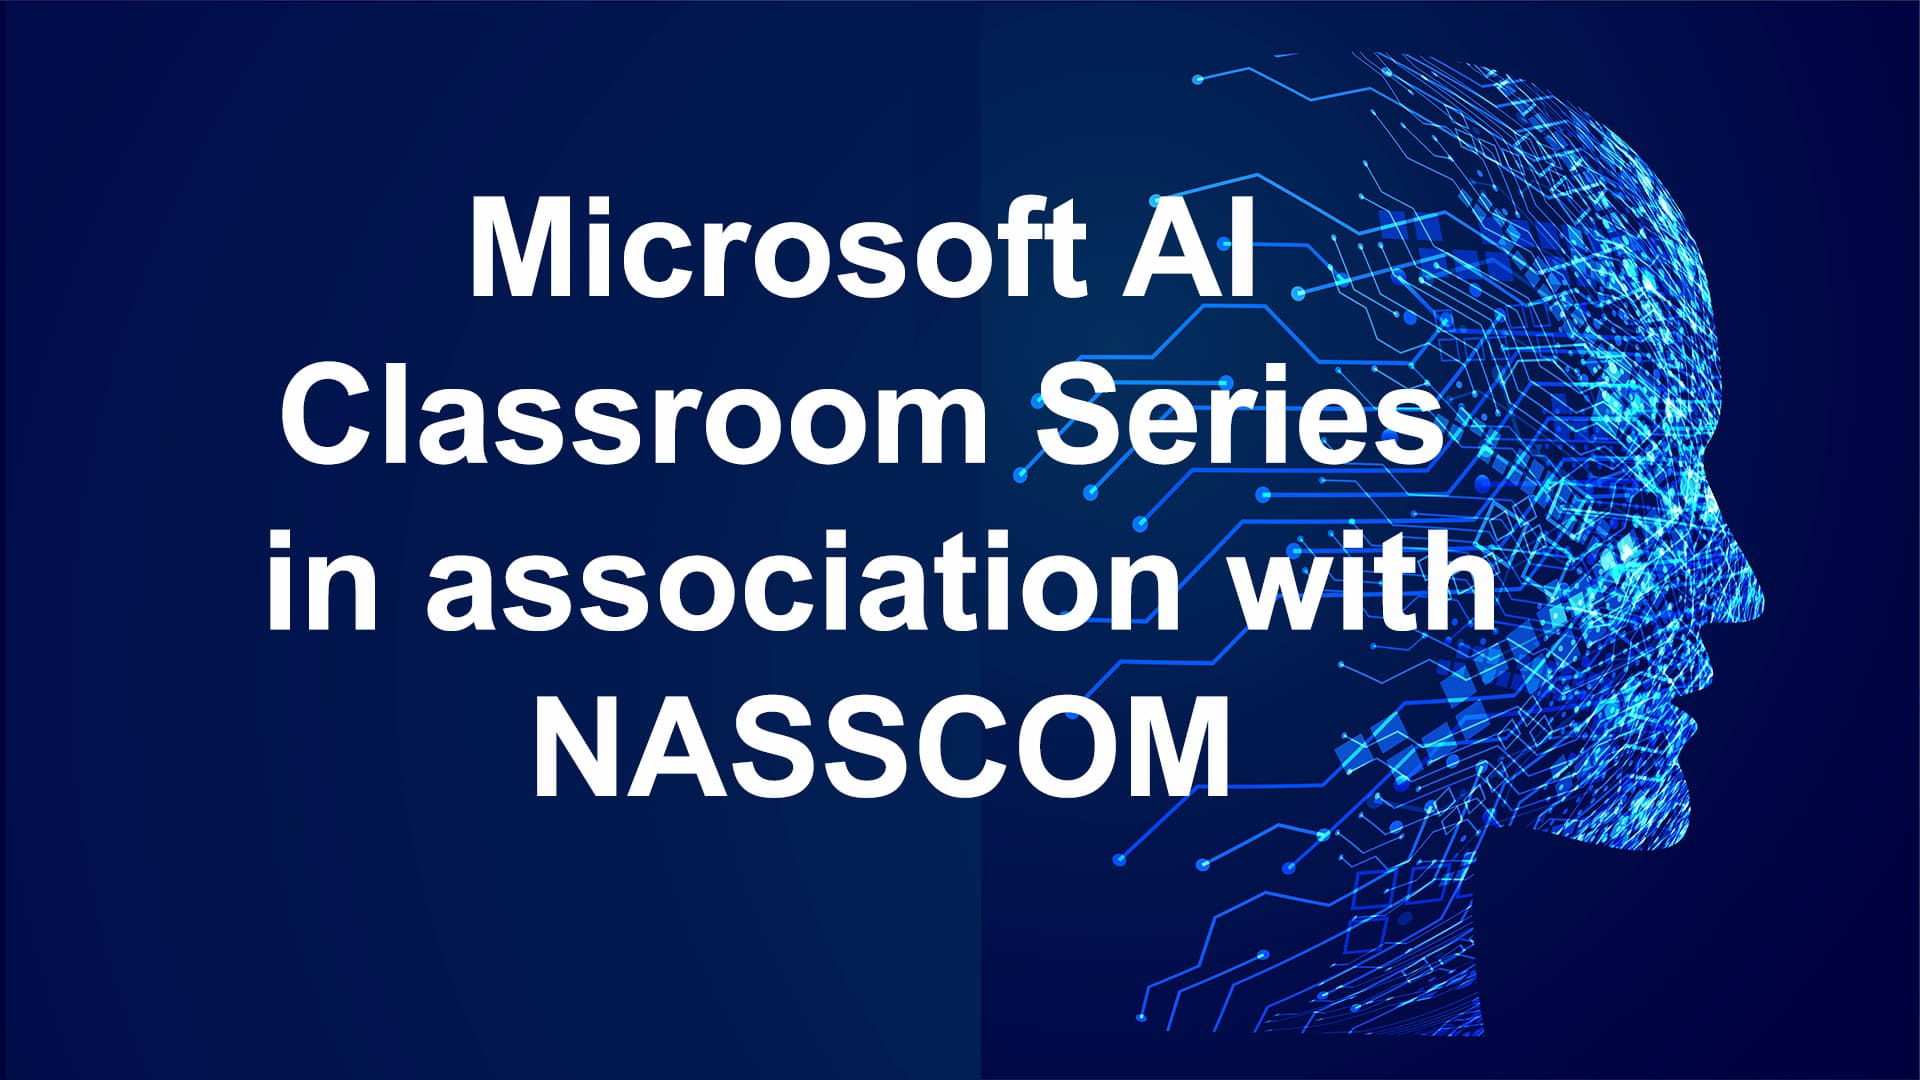 Microsoft AI Classroom Series in Association with NASSCOM